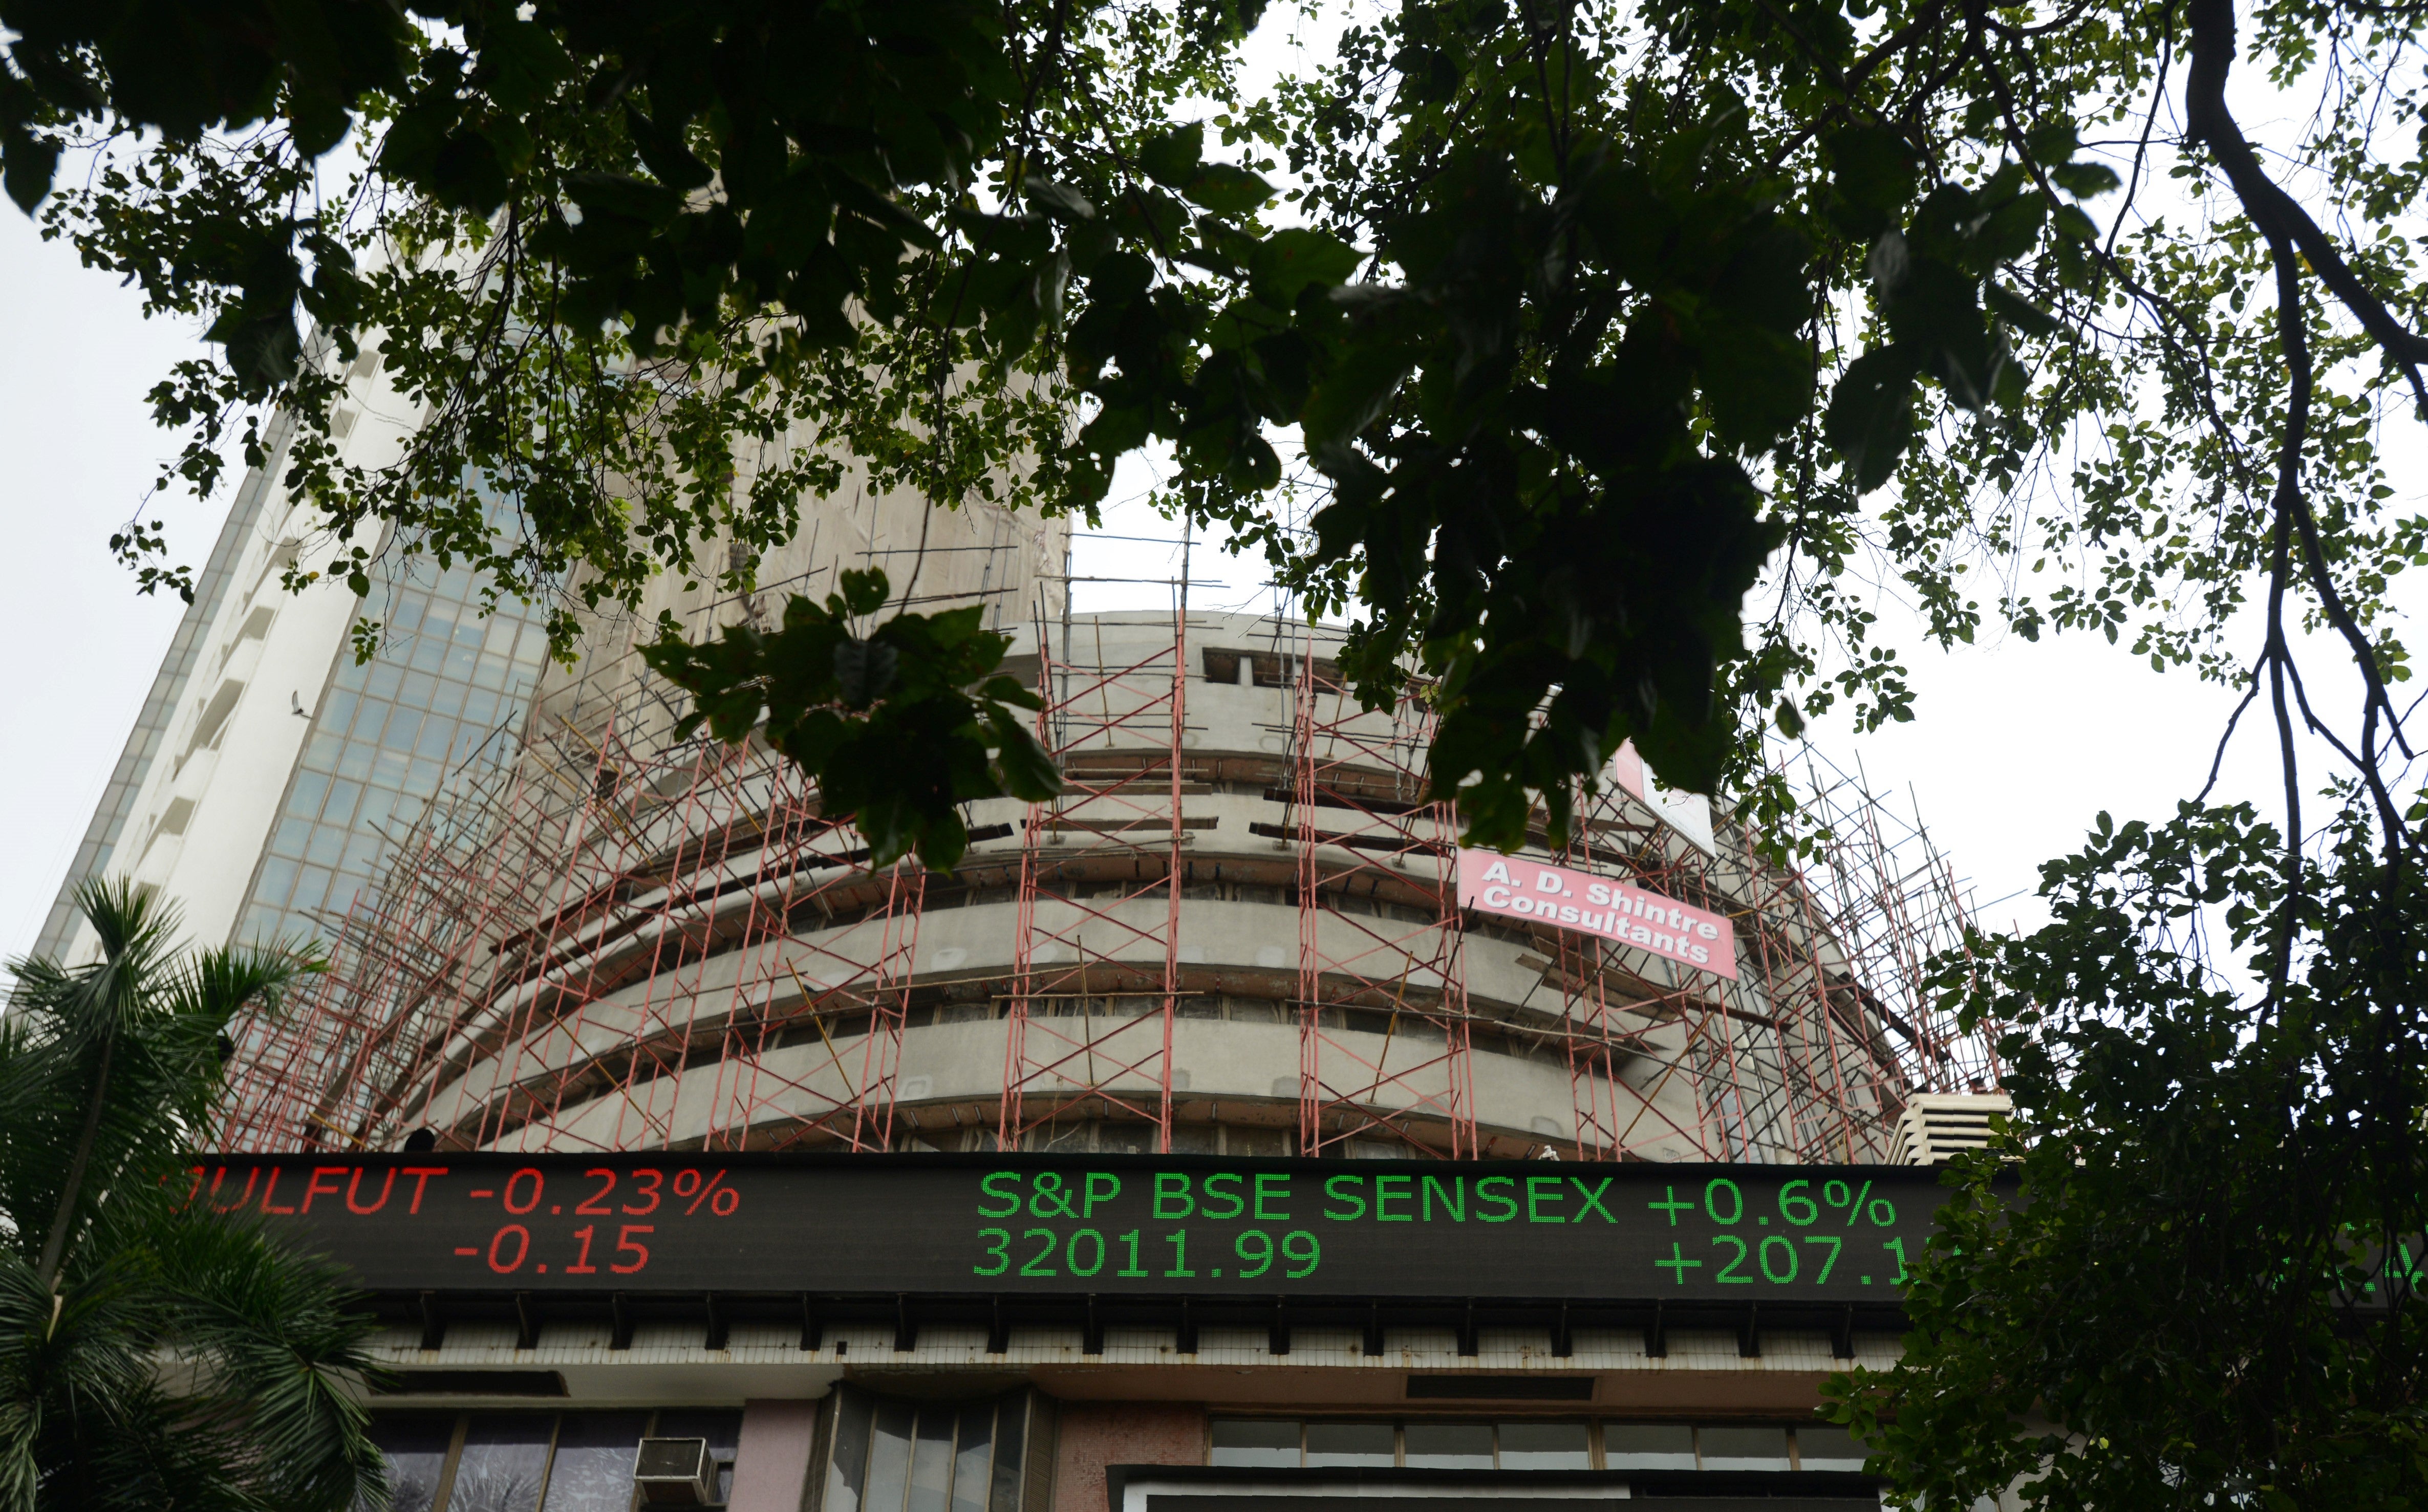 File image: Sensex closed at 52,950, up 0.7 per cent on.Monday